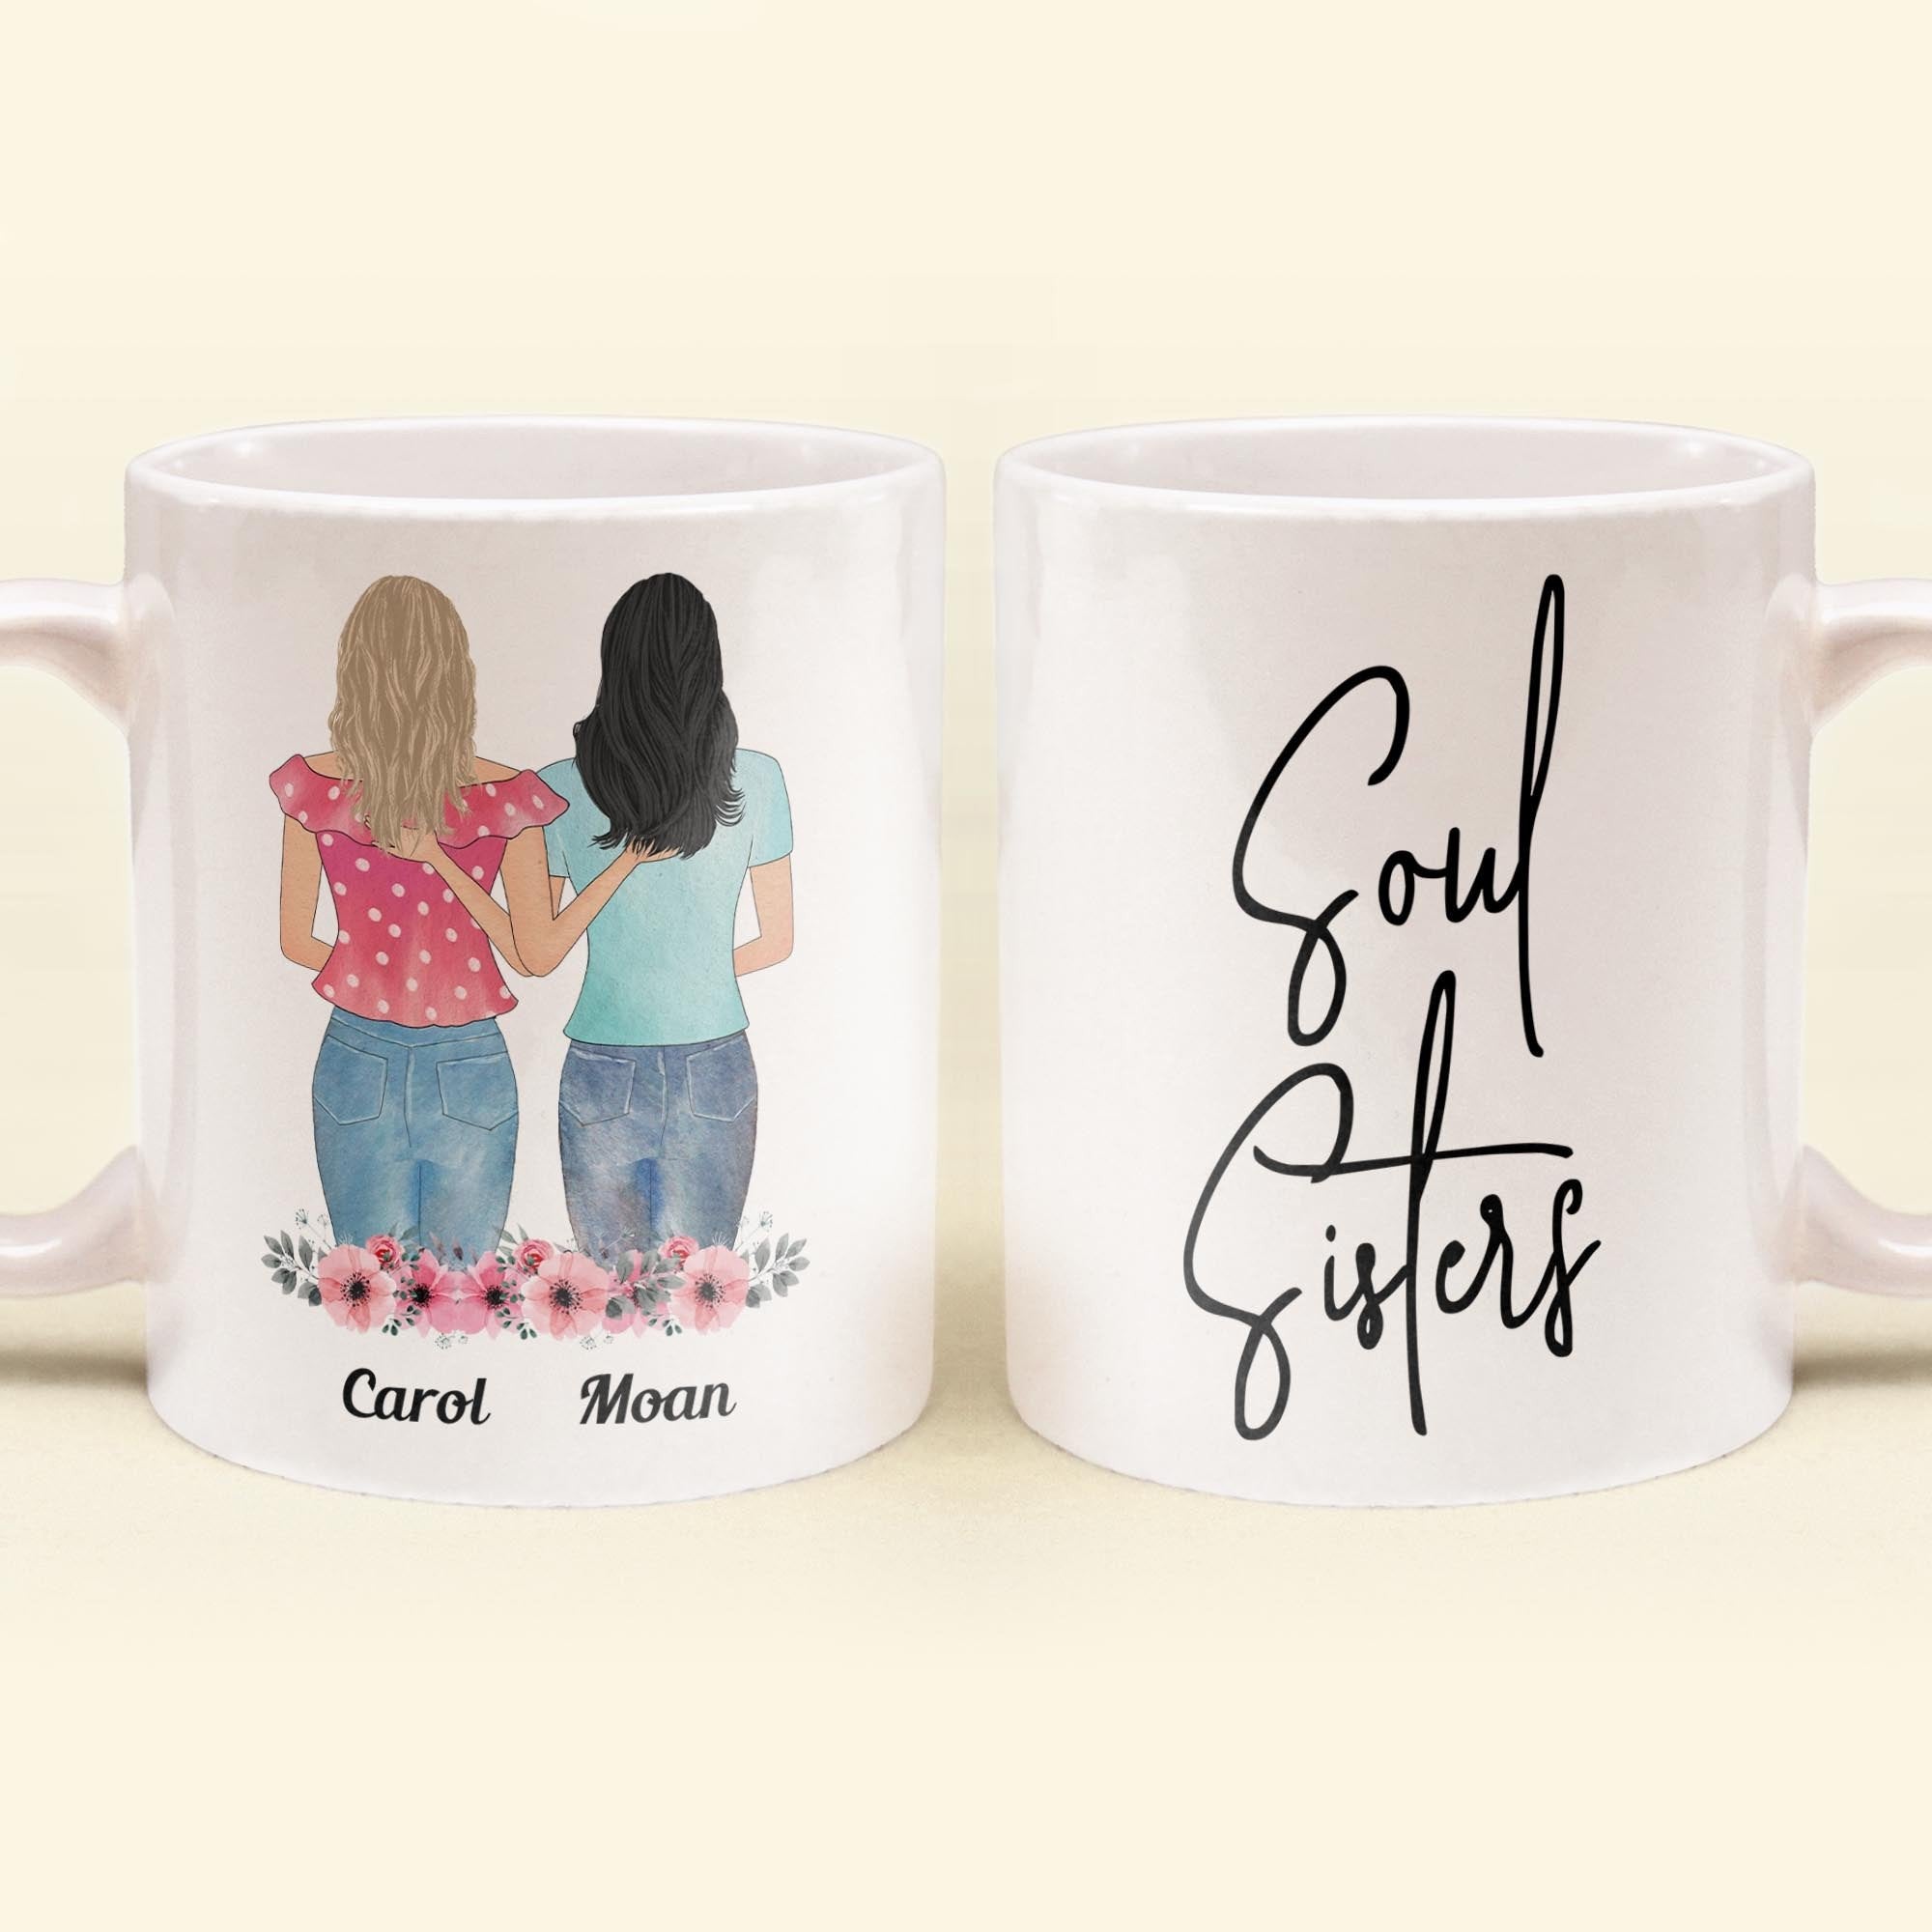 Soul Sisters Ver 2 - Personalized Mug - Birthday Gift For Friends, Soul Sisters, BFF, Besties - Girls Drawing